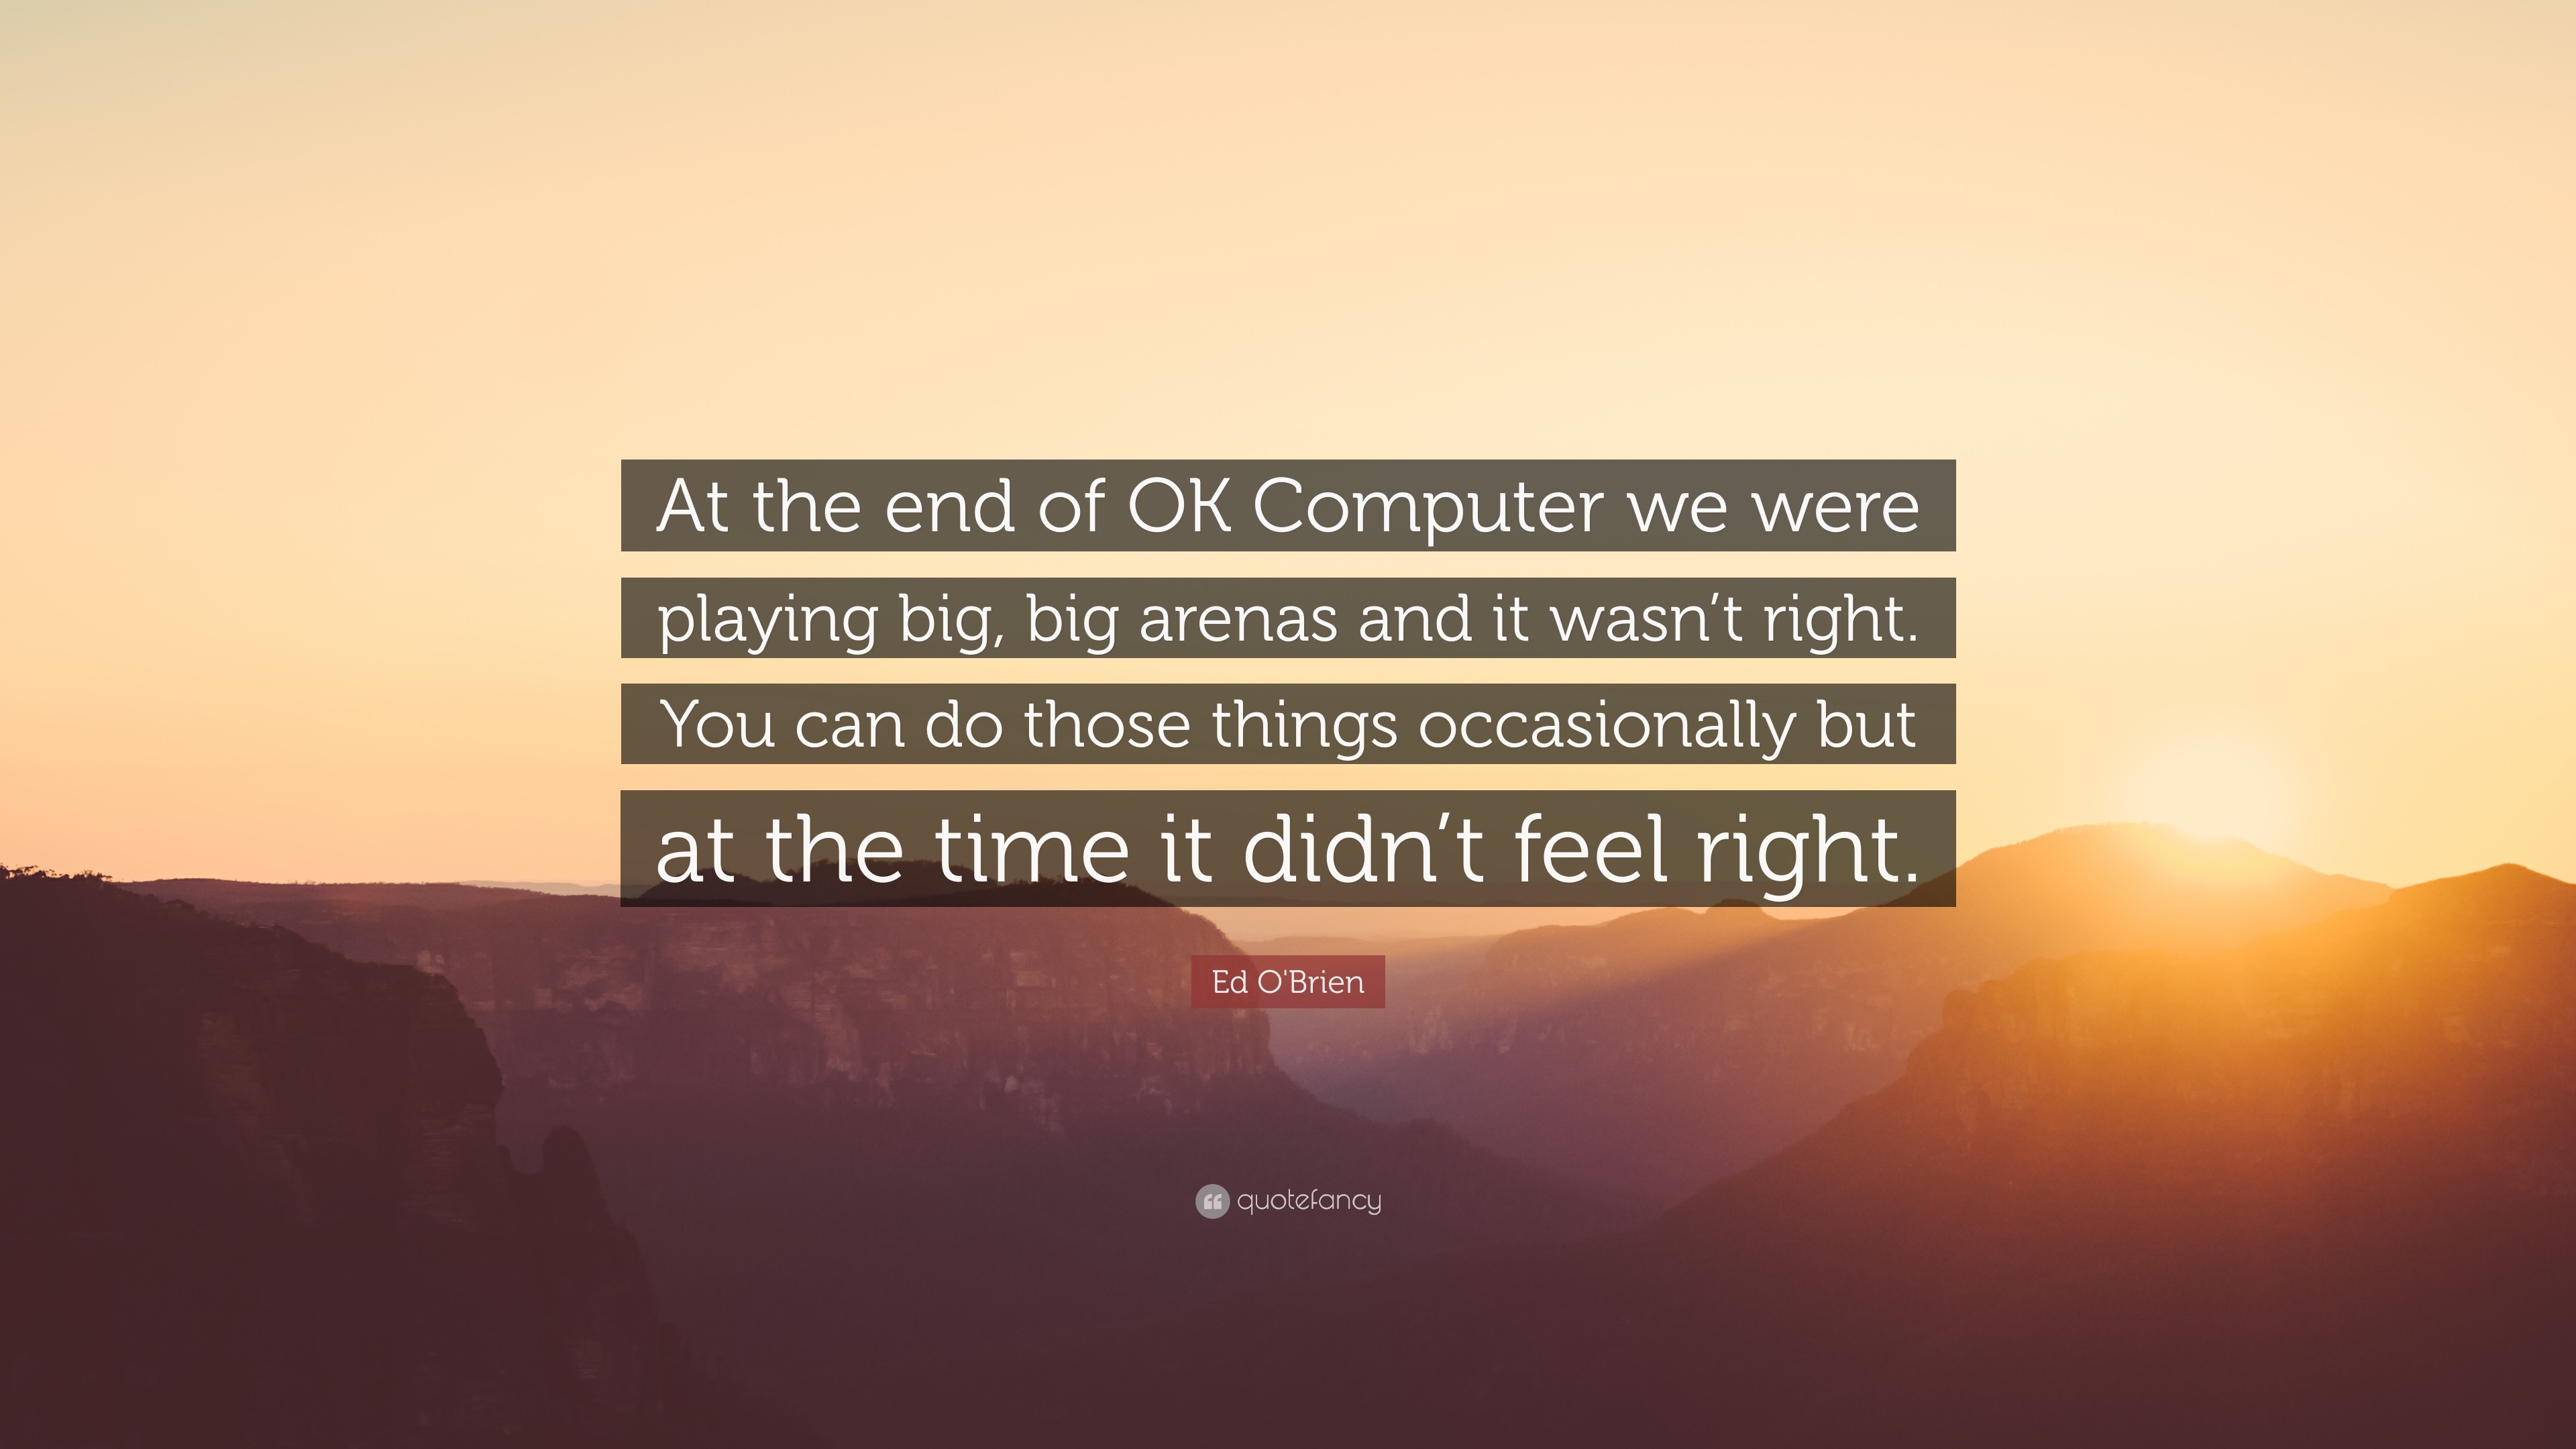 3840x2160 Ed O'Brien Quote: “At the end of OK Computer we were playing